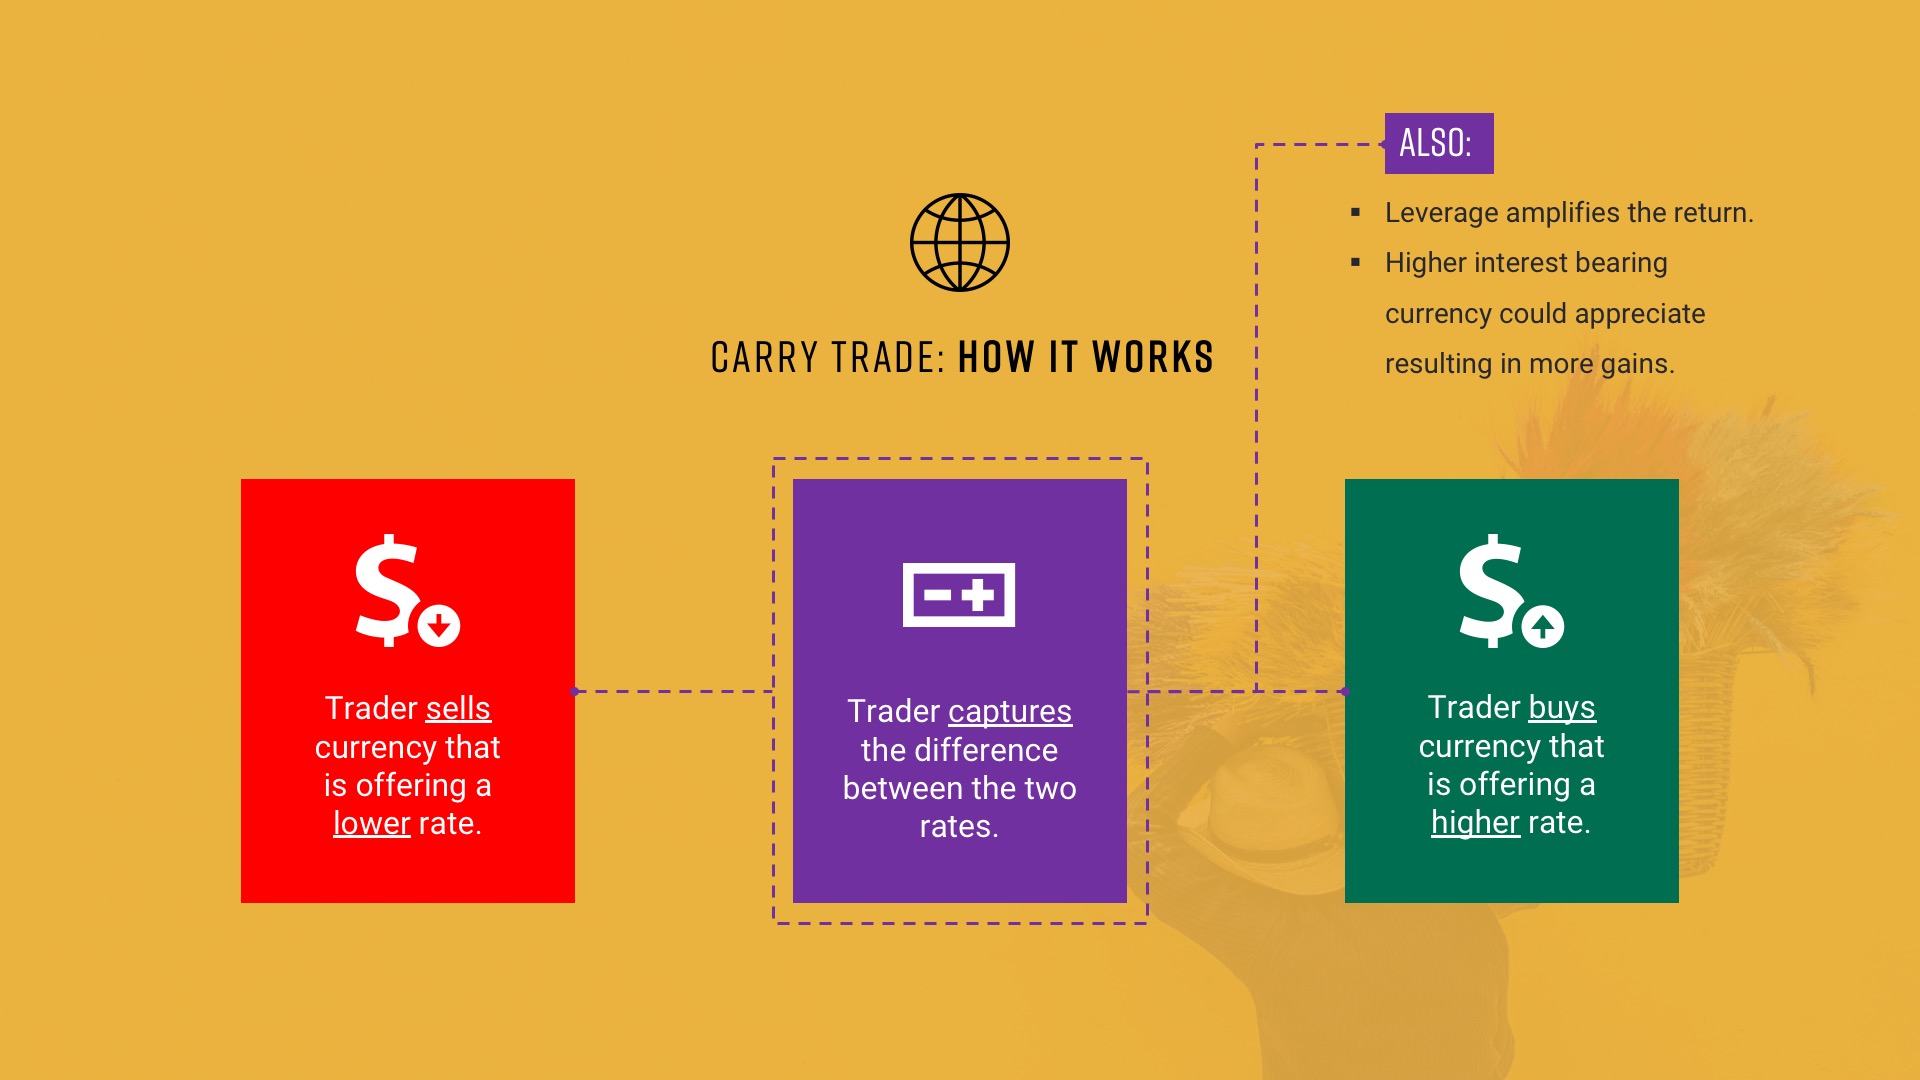 forex for beginners - The Carry Trade: How it works